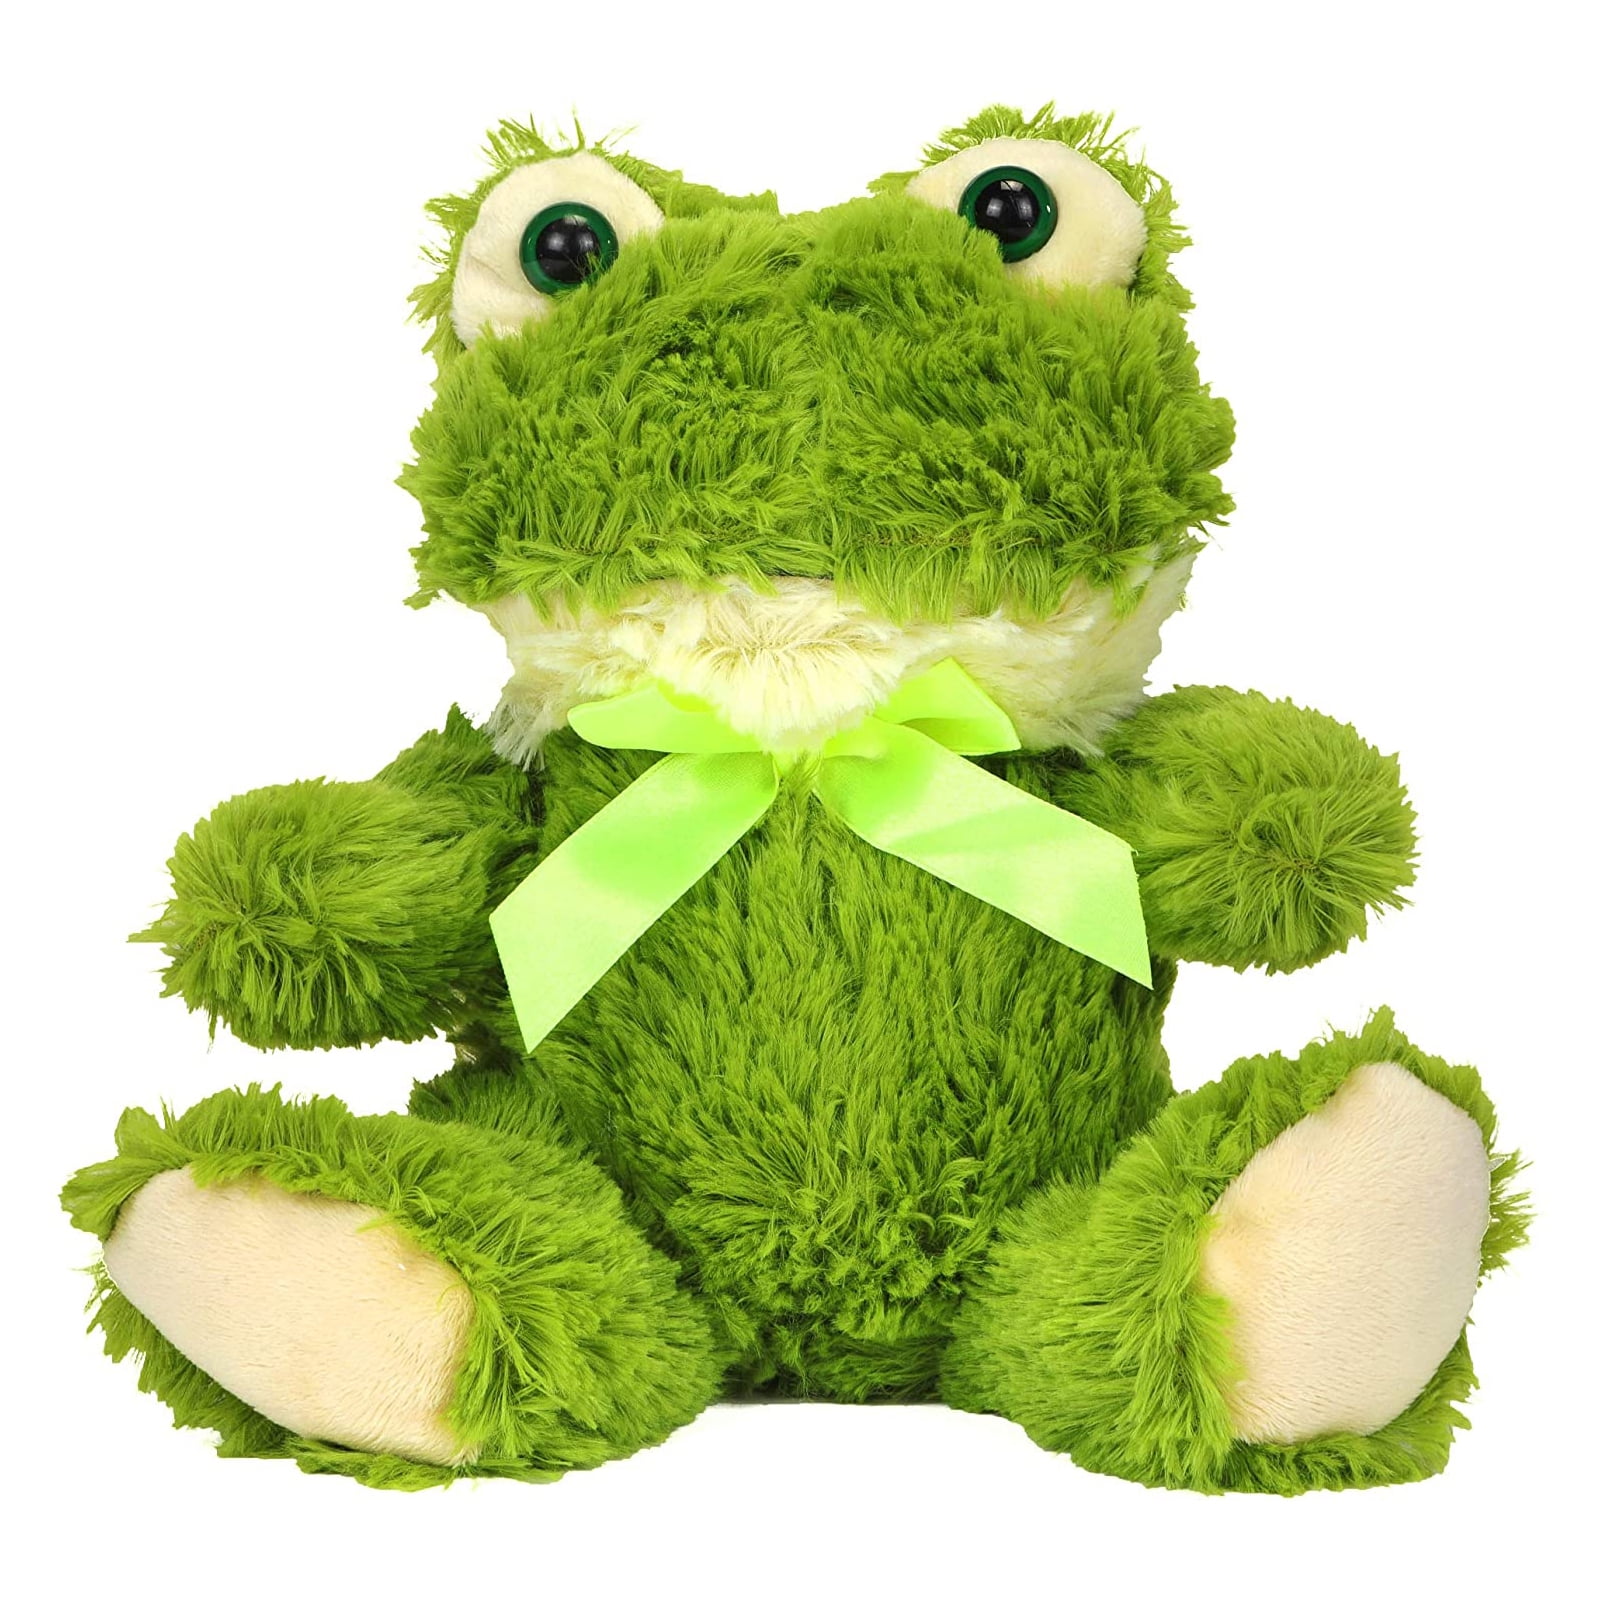 Soft Frog Plush Cute Frog Stuffed Animal with Bowknot Fluffy Frog